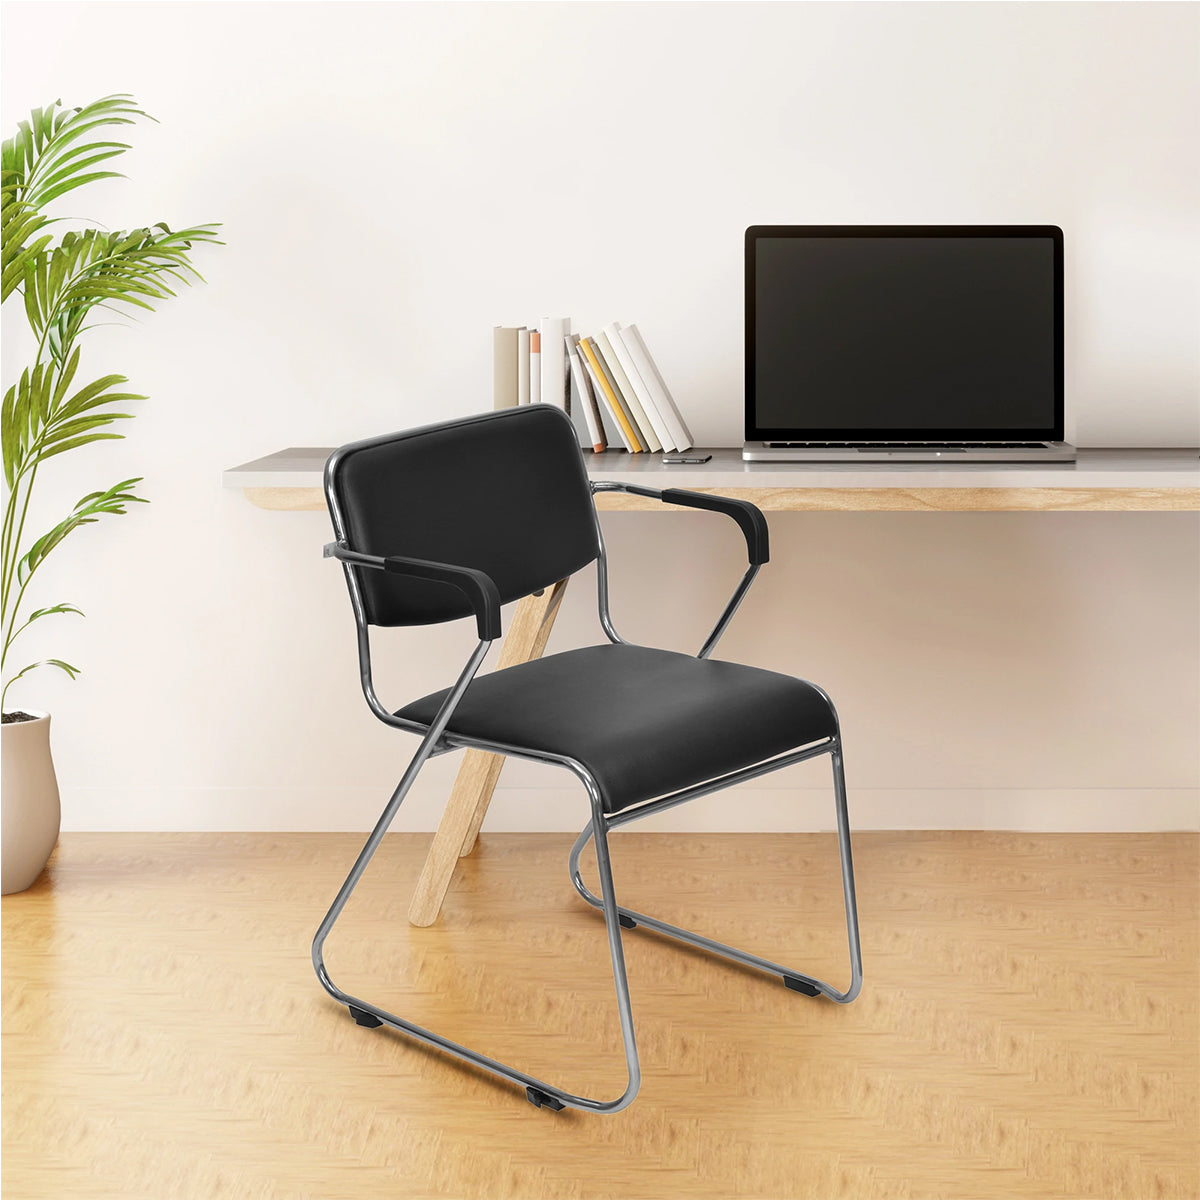 Nilkamal Contract 01 with Arm Visitor Chair (Black)